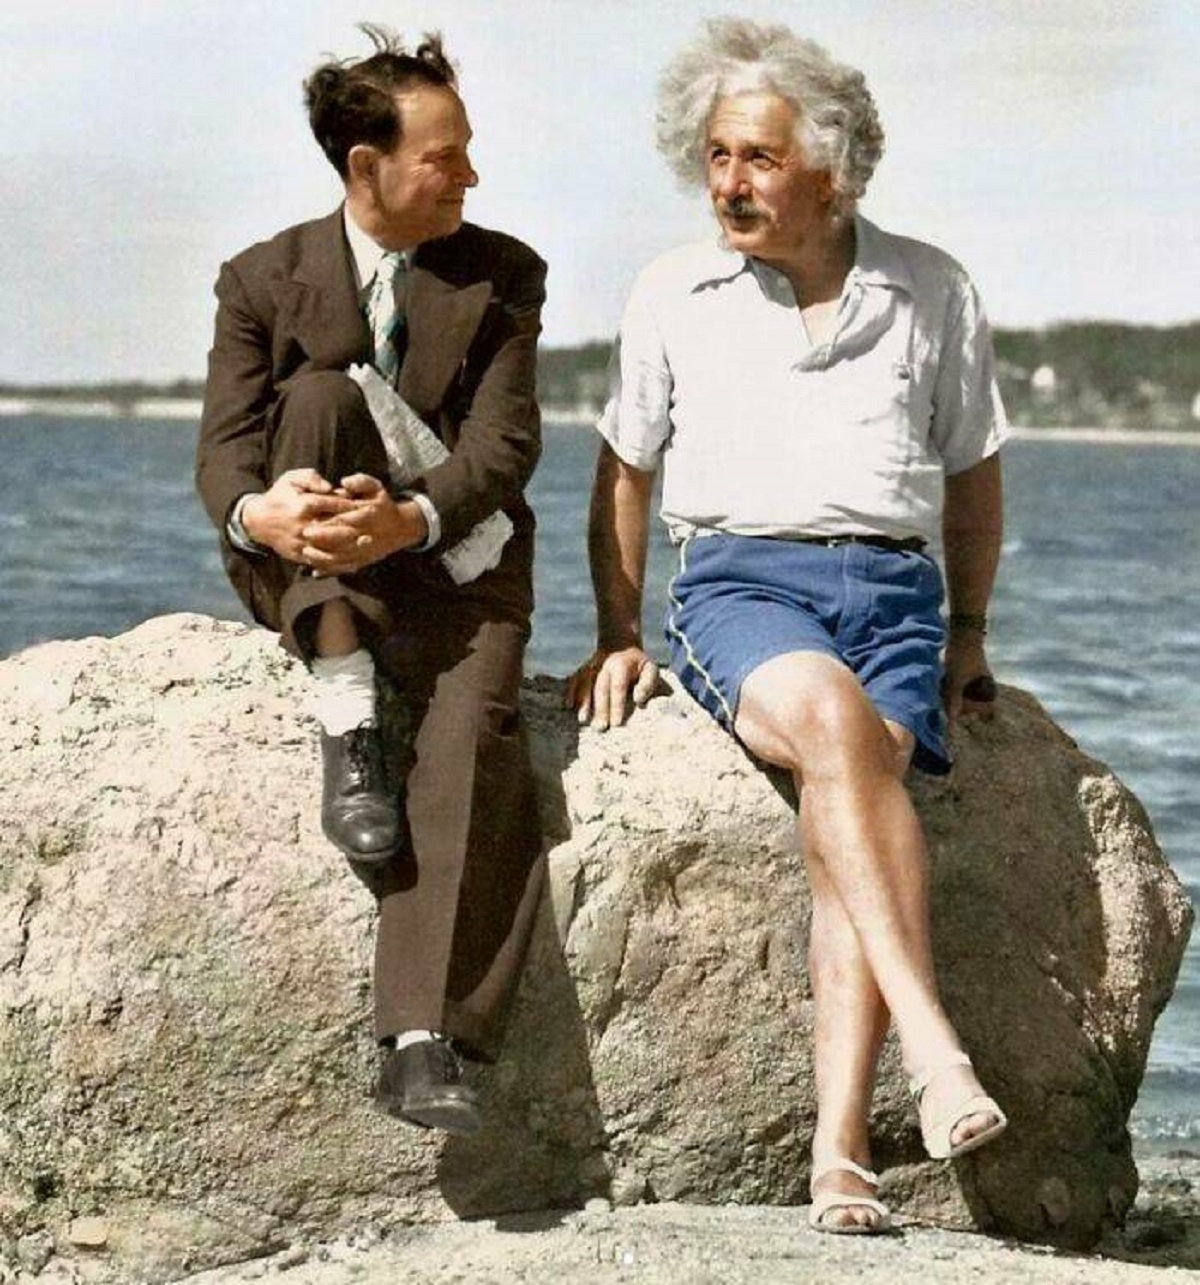 "In 1939, Albert Einstein Was Captured In A Photo At Nassau Point, New York, Sporting Sandals"

"Seated beside him was his friend and local store proprietor, David Rothman. An amusing incident preceded this snapshot, stemming from Einstein's heavily accented request for a pair of "sundahls," which Rothman misunderstood as "sundial." After some initial confusion in the store, Einstein eventually acquired the white sandals he was wearing for $1.35. He took the situation in good humor, attributing it to his "atrocious accent." Despite the mix-up, the two men maintained a strong friendship."